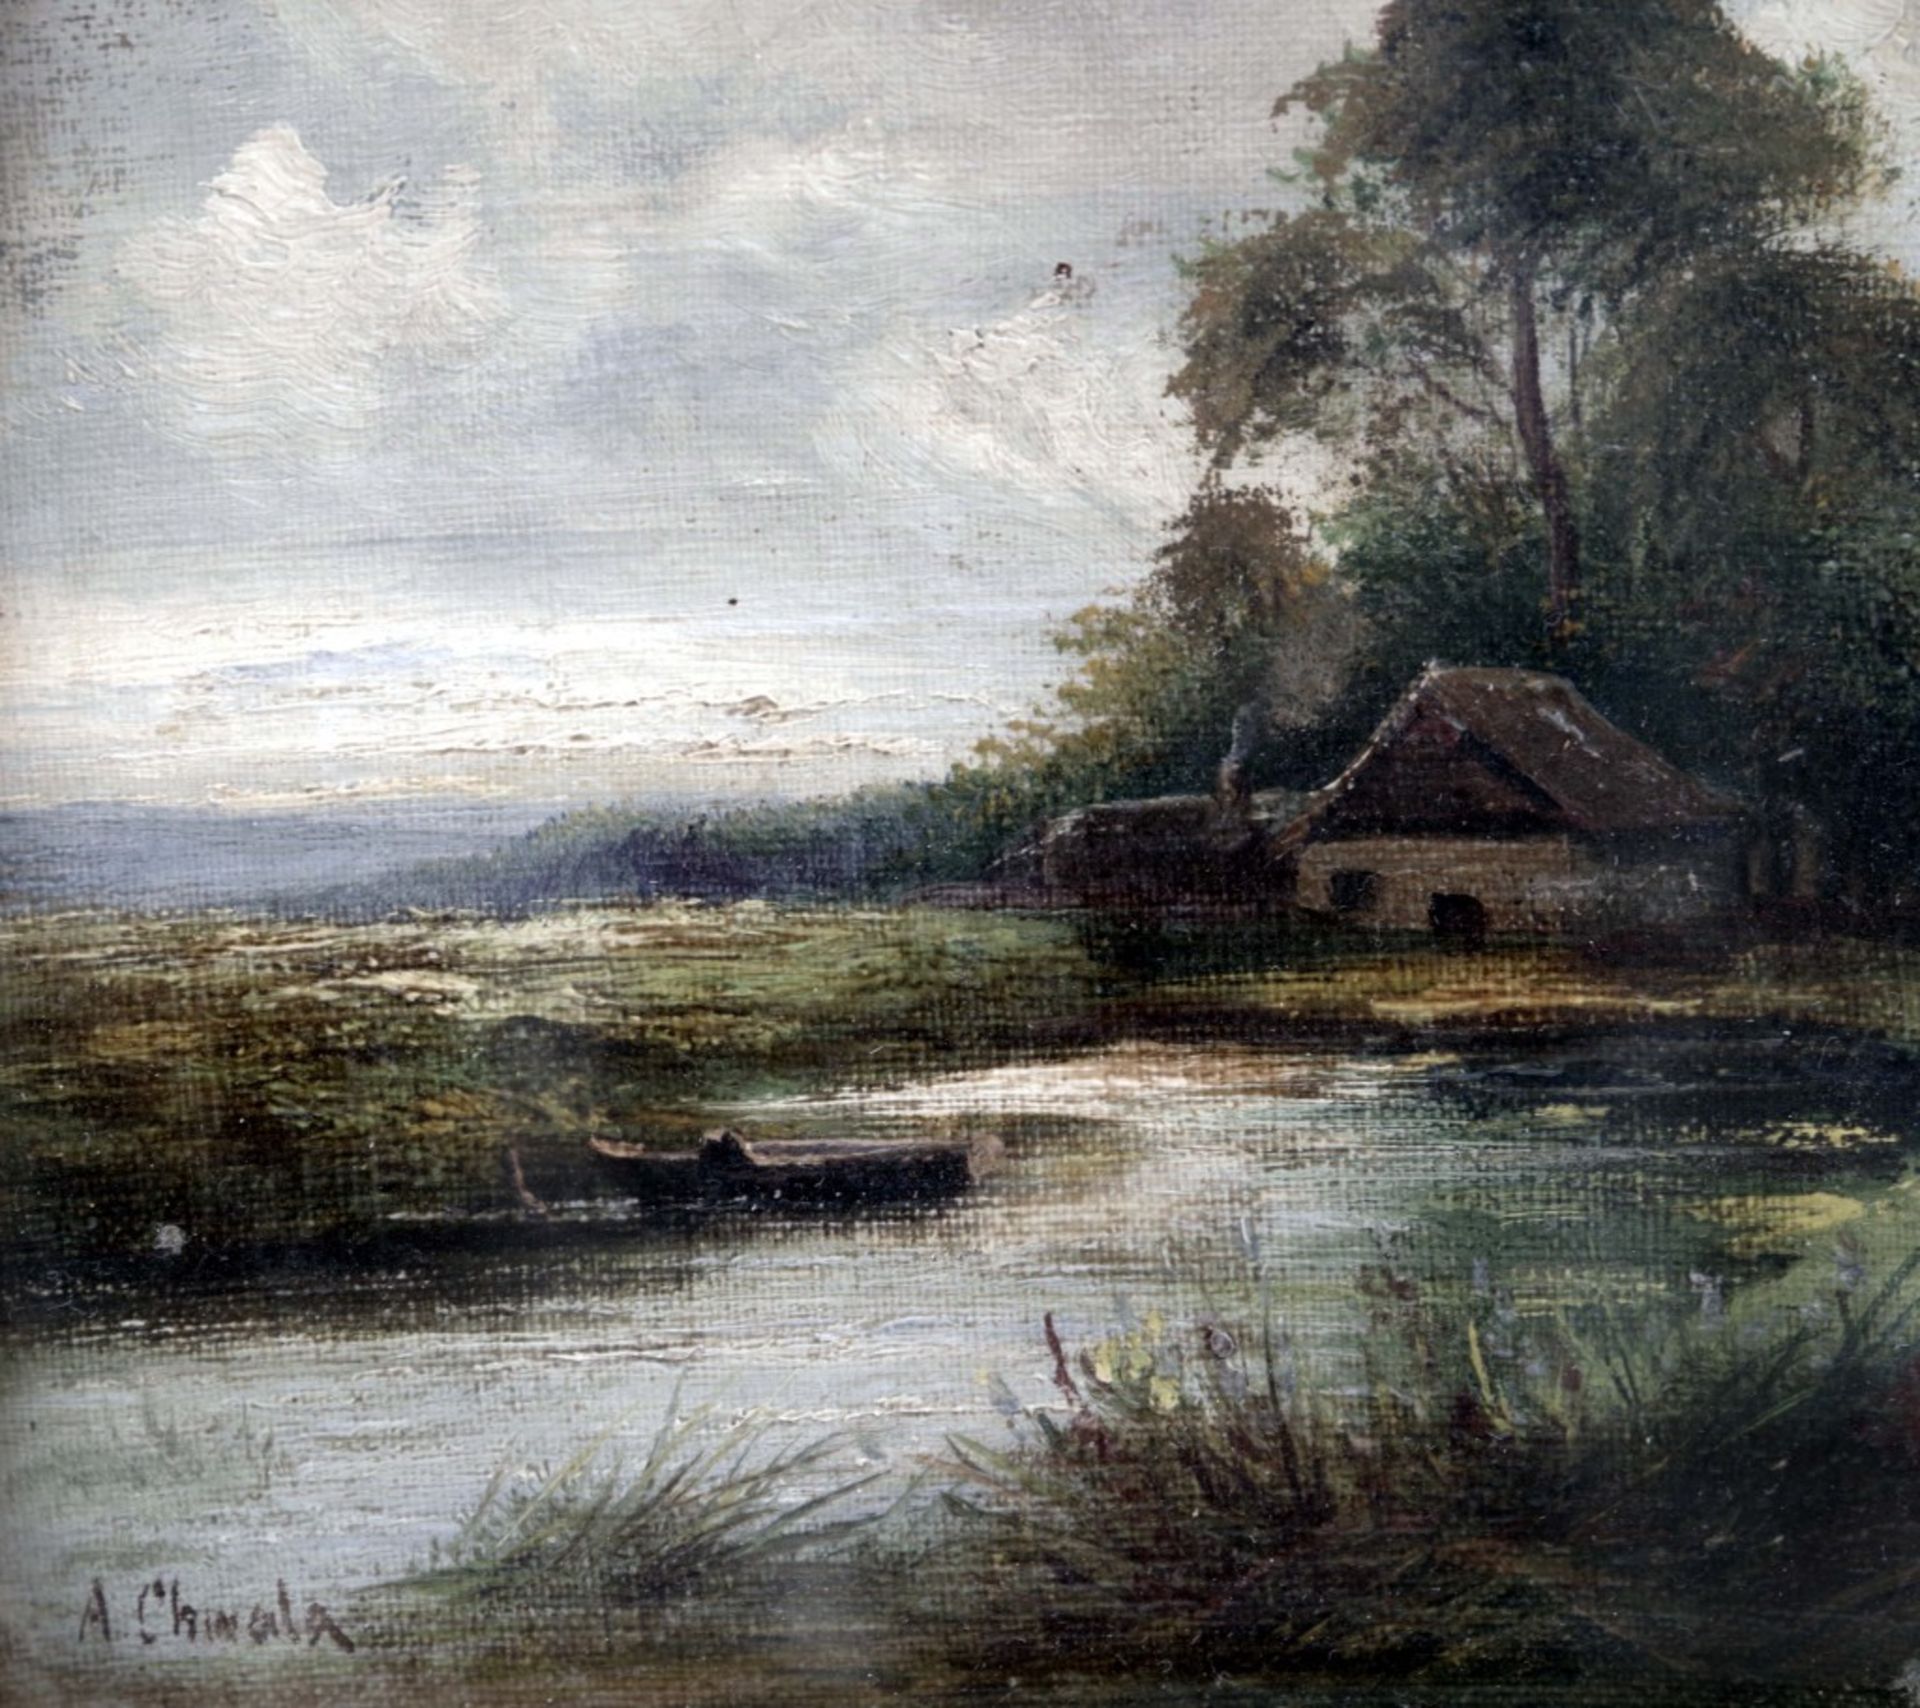 A Cottage on the Bend of a River by Adolf Chwala - Image 4 of 6